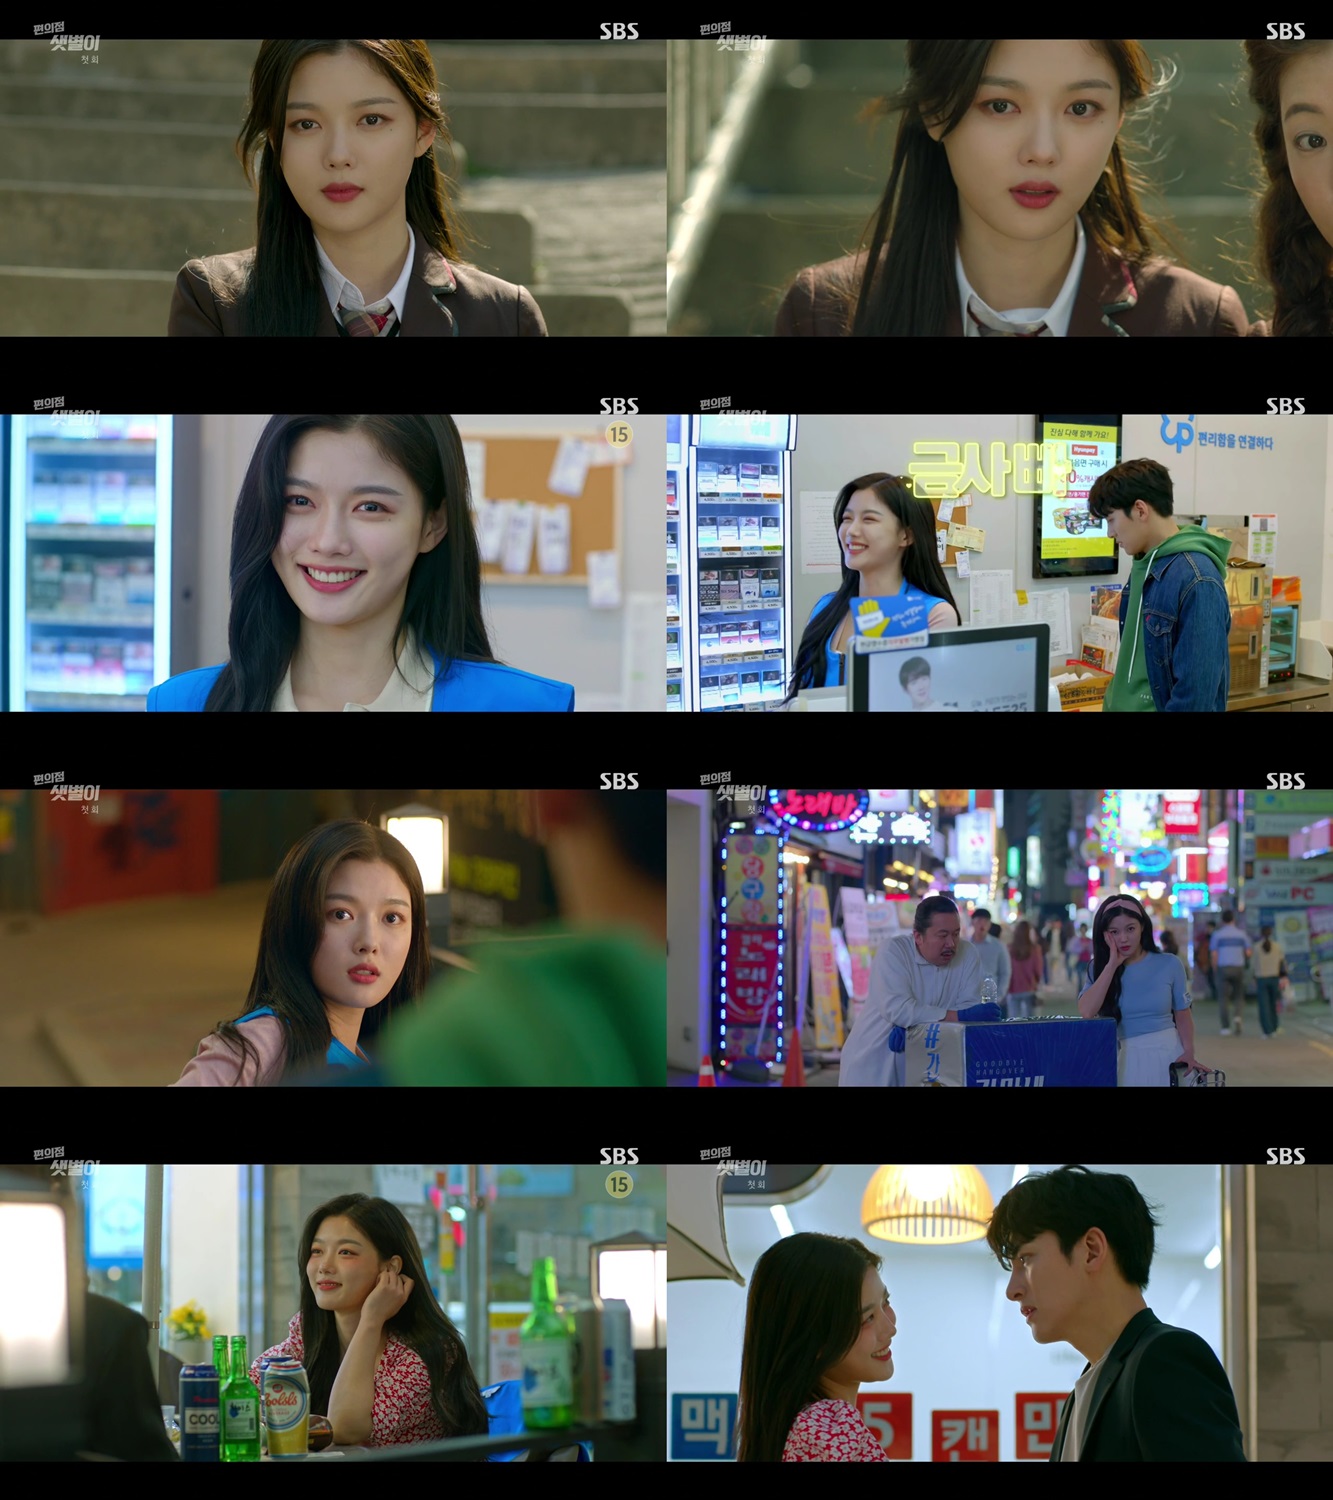 Actor Kim Yoo-jung has completely absorbed comic romance.It was a crazy hot show that was stirred up from the first broadcast as if watching a one-man show in SBSs new gilt drama Convenience store morning star.In the drama Convenience Store Morning Star, which aired on the 19th, the sweet and bloody first meeting between Kim Yoo-jung and Daehyun was drawn, and at the same time, three years later, the story of a star who entered the Convenience store of Daehyun as a temporary alba at the end of twists and turns It stimulated their interest.Kim Yoo-jungs Chung Sae Star is a full-fledged 4-dimensional Convenience Store Part time job that makes Daehyuns back with a proud but shameless attitude and a cheerful picture of struggling to become a formal part time job in a temporary part time job.In particular, Kim Yoo-jung not only showed off his unharmed visuals freely during his high school days and adult days, but also attracted viewers with his perfect appearance in the character, as he ripped out the webtoon, as well as the perfect synchro rate as well as unique spicy ambassadors.Convenience store morning star, who opened with Kim Yoo-jungs intense and comical action, is expecting to be responsible for the summer weekend evening by announcing the signal of comic restaurant with colorful acting power that makes it impossible to keep an eye on from excitement to comic, action and spicy smoke.On the other hand, Convenience store morning star is broadcast every Friday and Saturday at 10 pm.Photo = SBS Broadcasting Screen